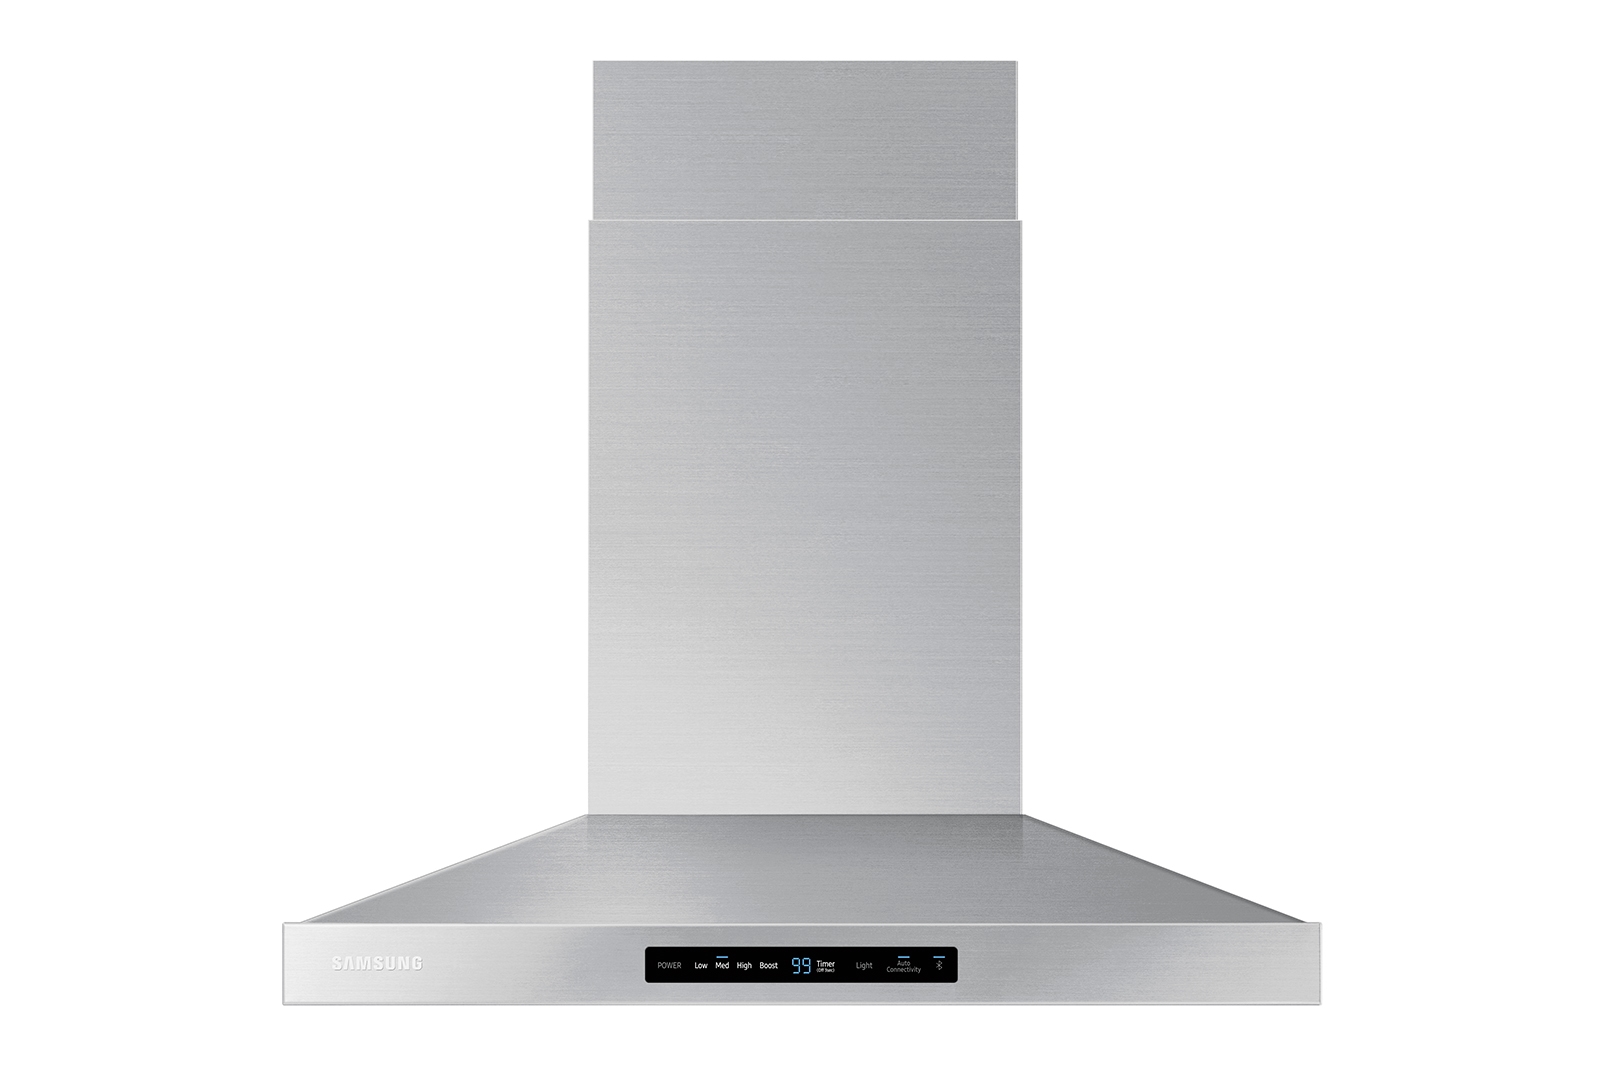 Photos - Cooker Samsung 30" Wall Mount Hood in Stainless Steel NK30K7000WS (NK30K7000WS/A2)